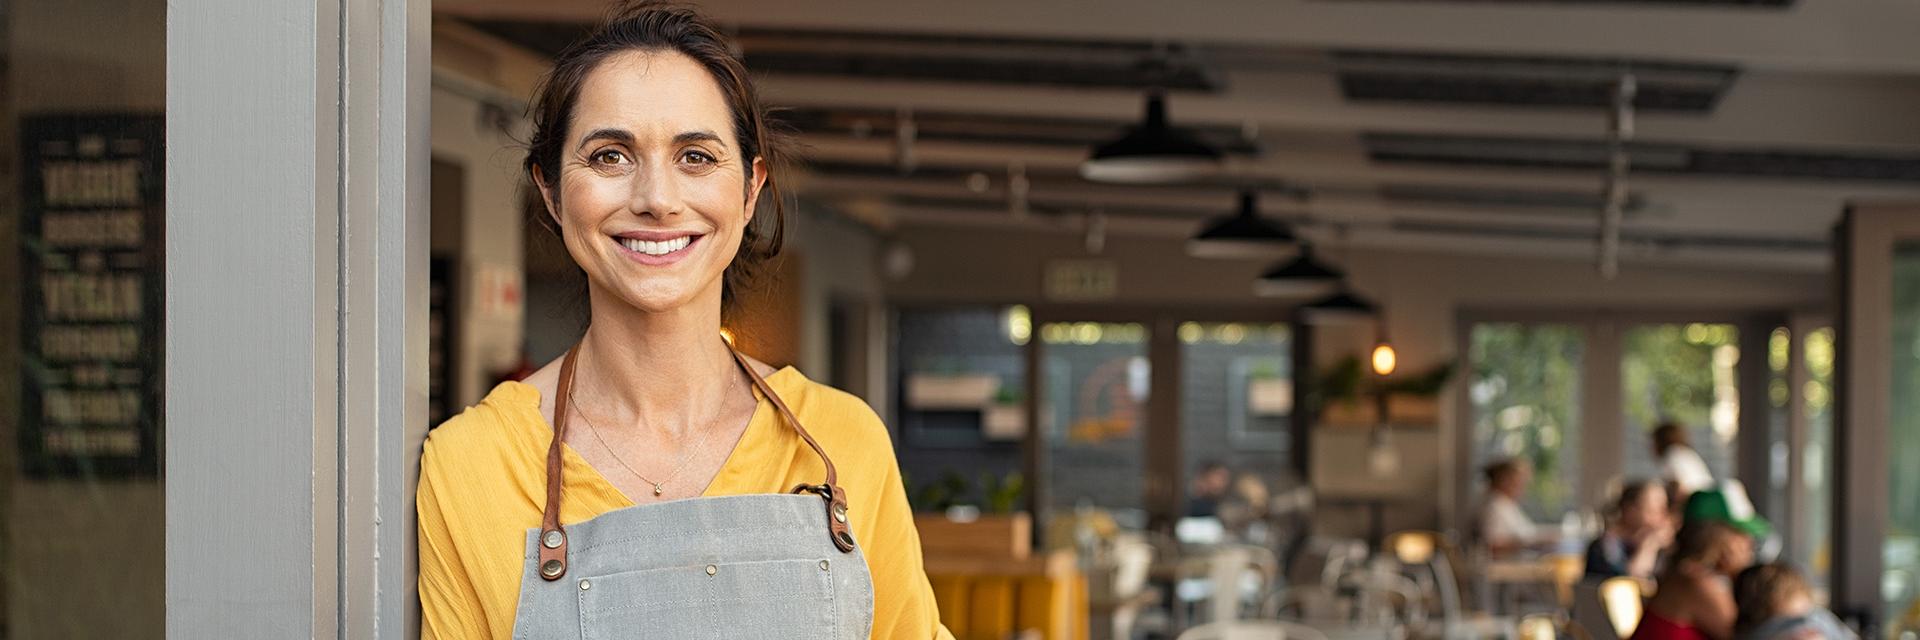 Portrait of happy woman standing at doorway of her store holding digital tablet. Cheerful mature waitress waiting for clients at coffee shop. Successful small business owner in casual clothing and grey apron standing at entrance and looking at camera.